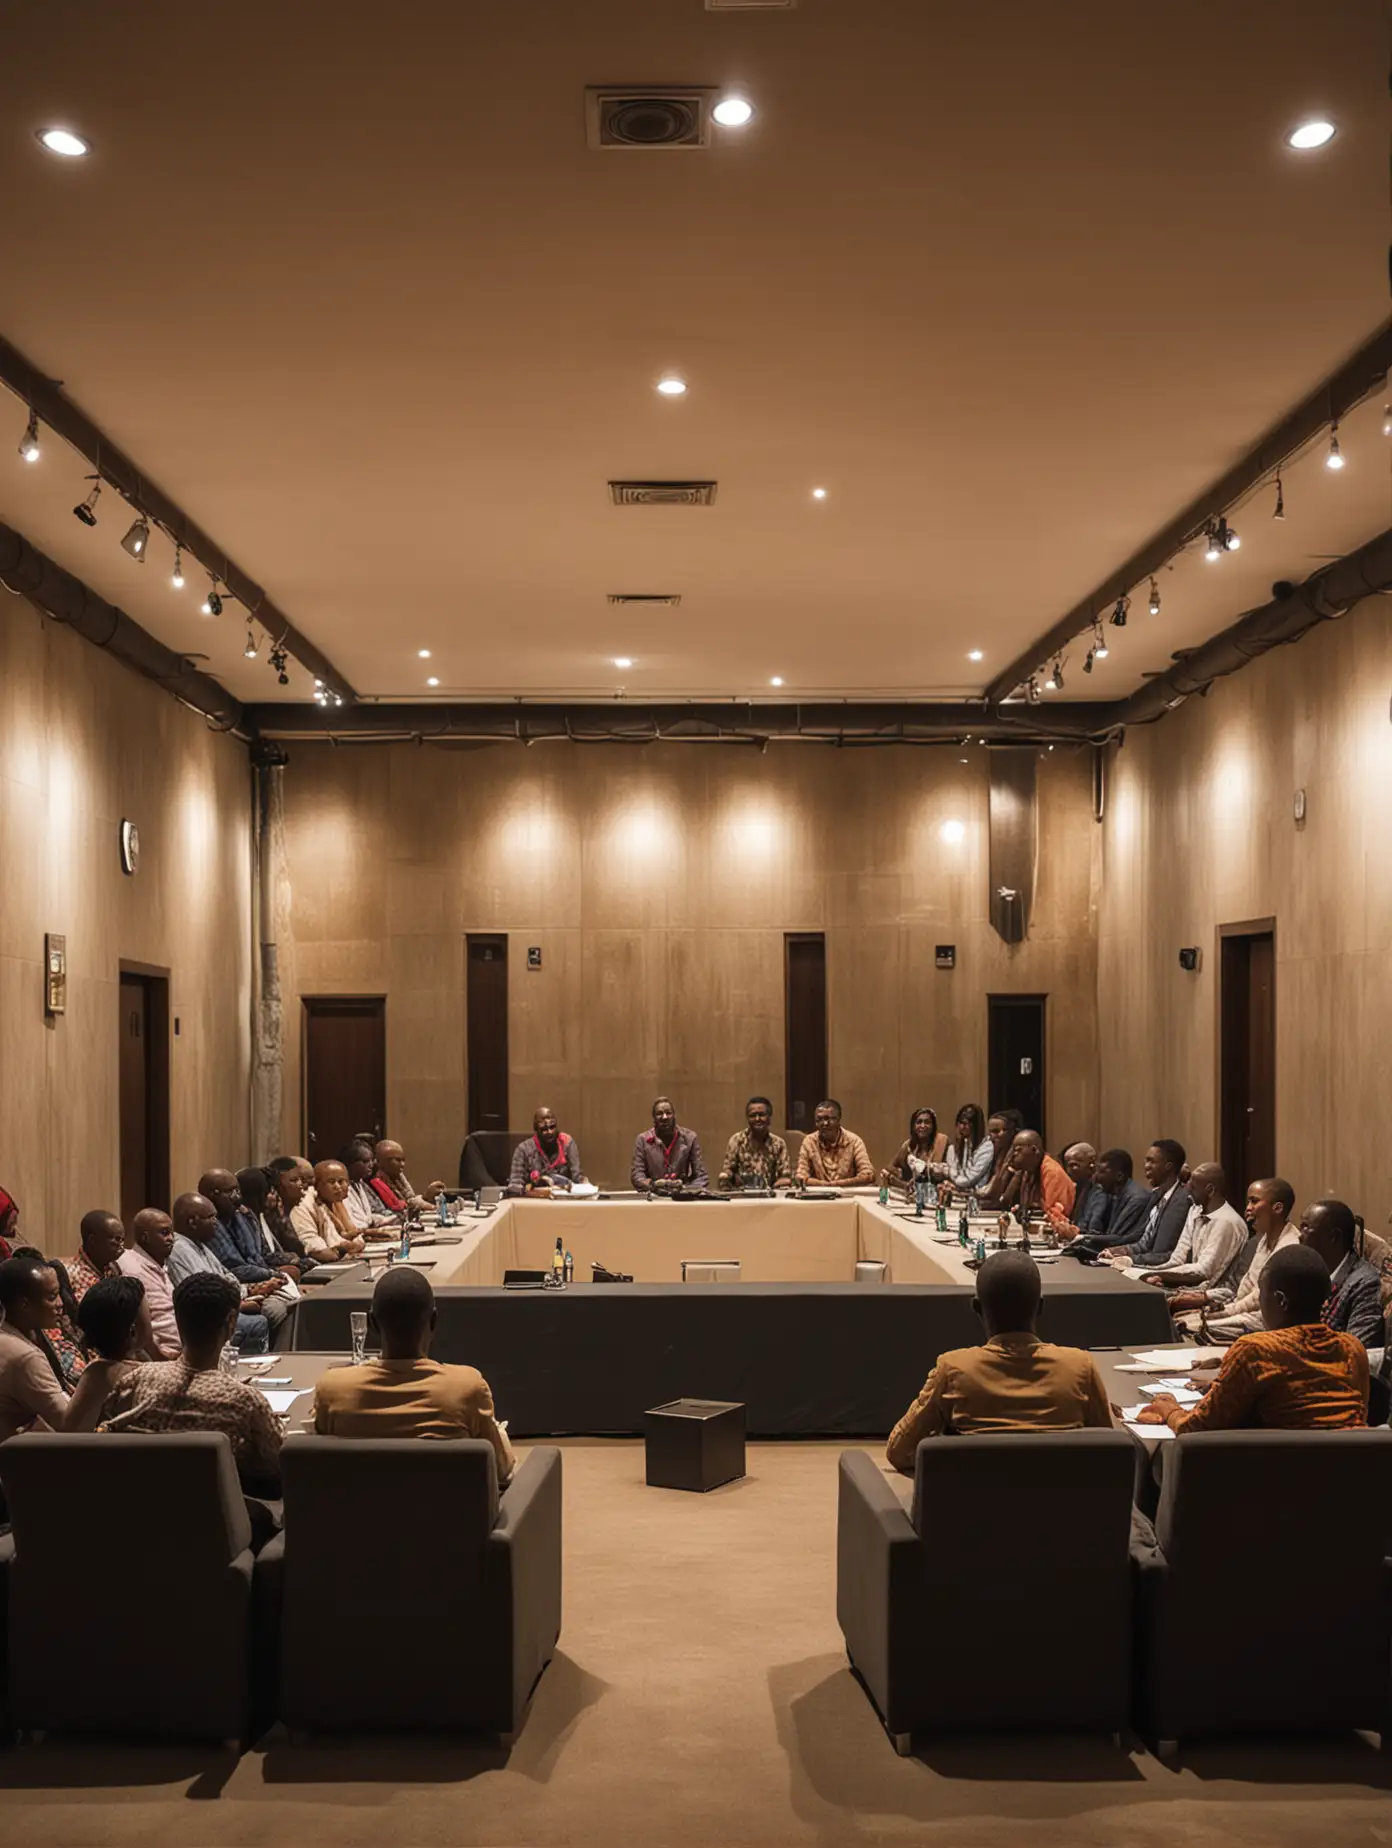 Modern Plush Meeting Hall with Seated Africans Professional Gathering in WellLit Space